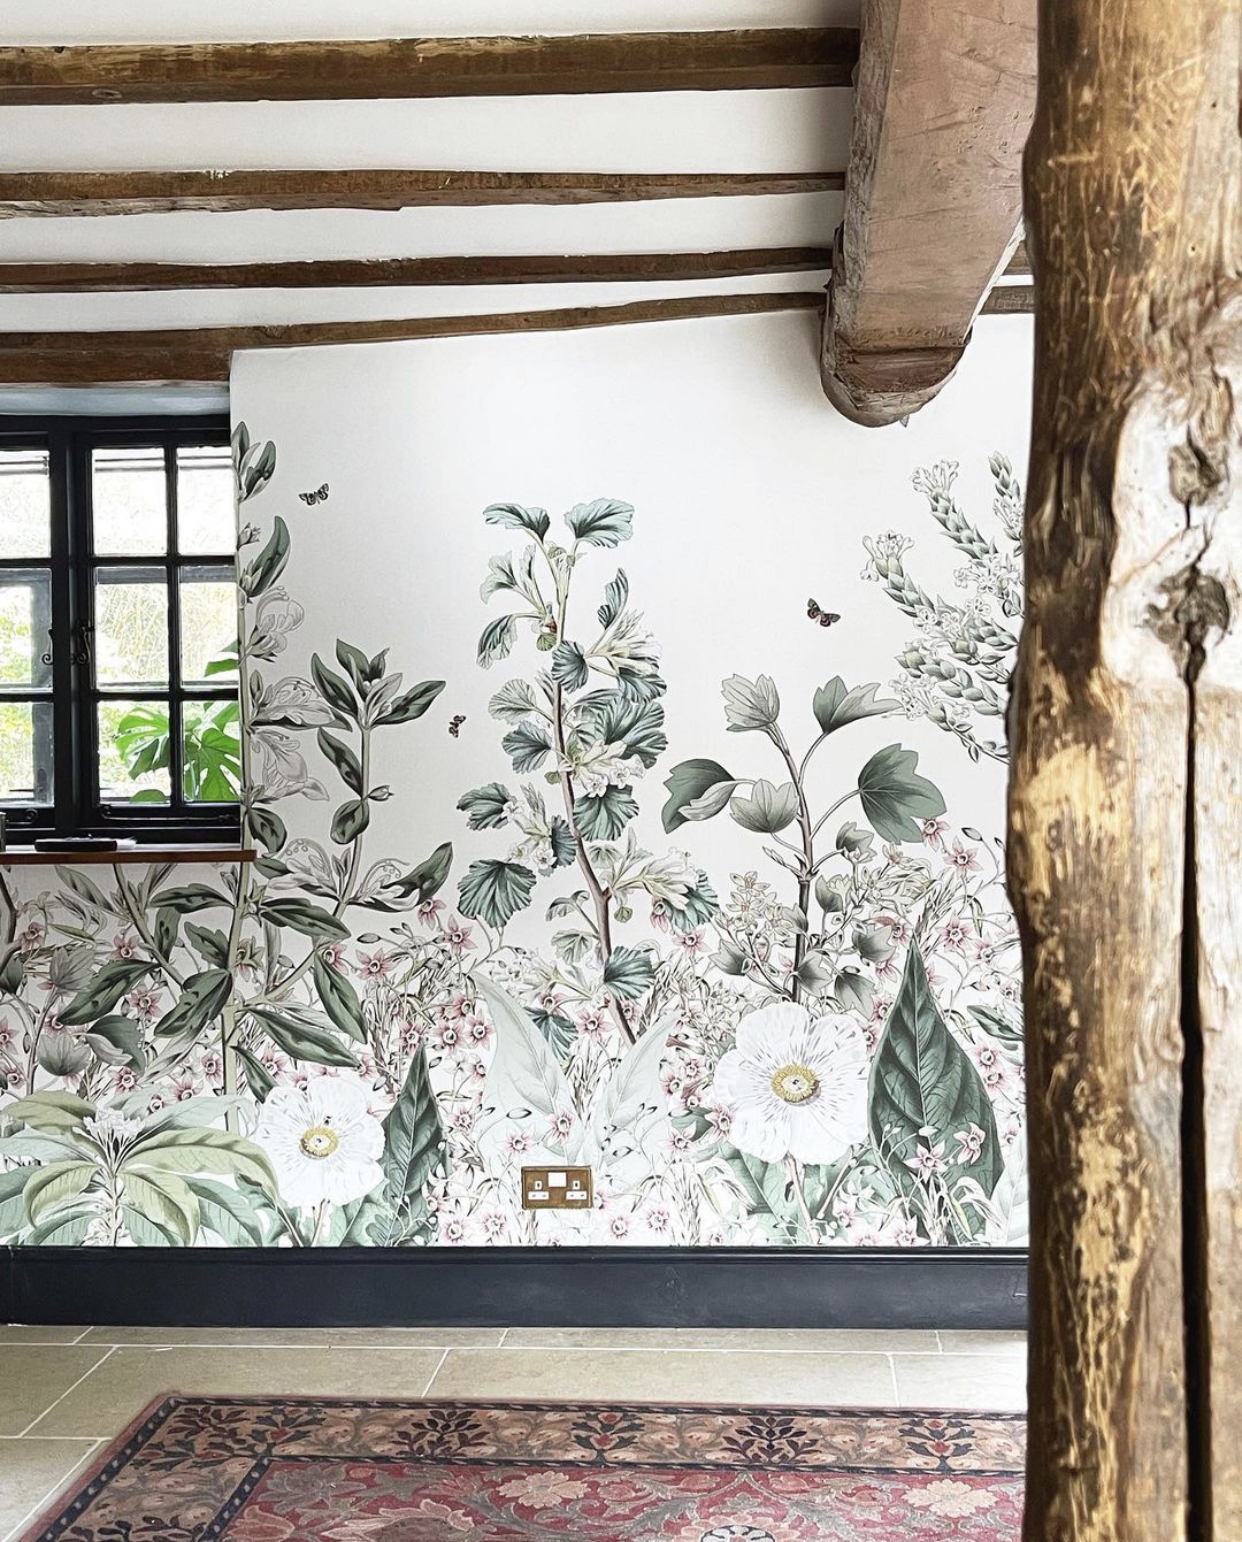 mural in listed beamed cottage via @the_listed_home